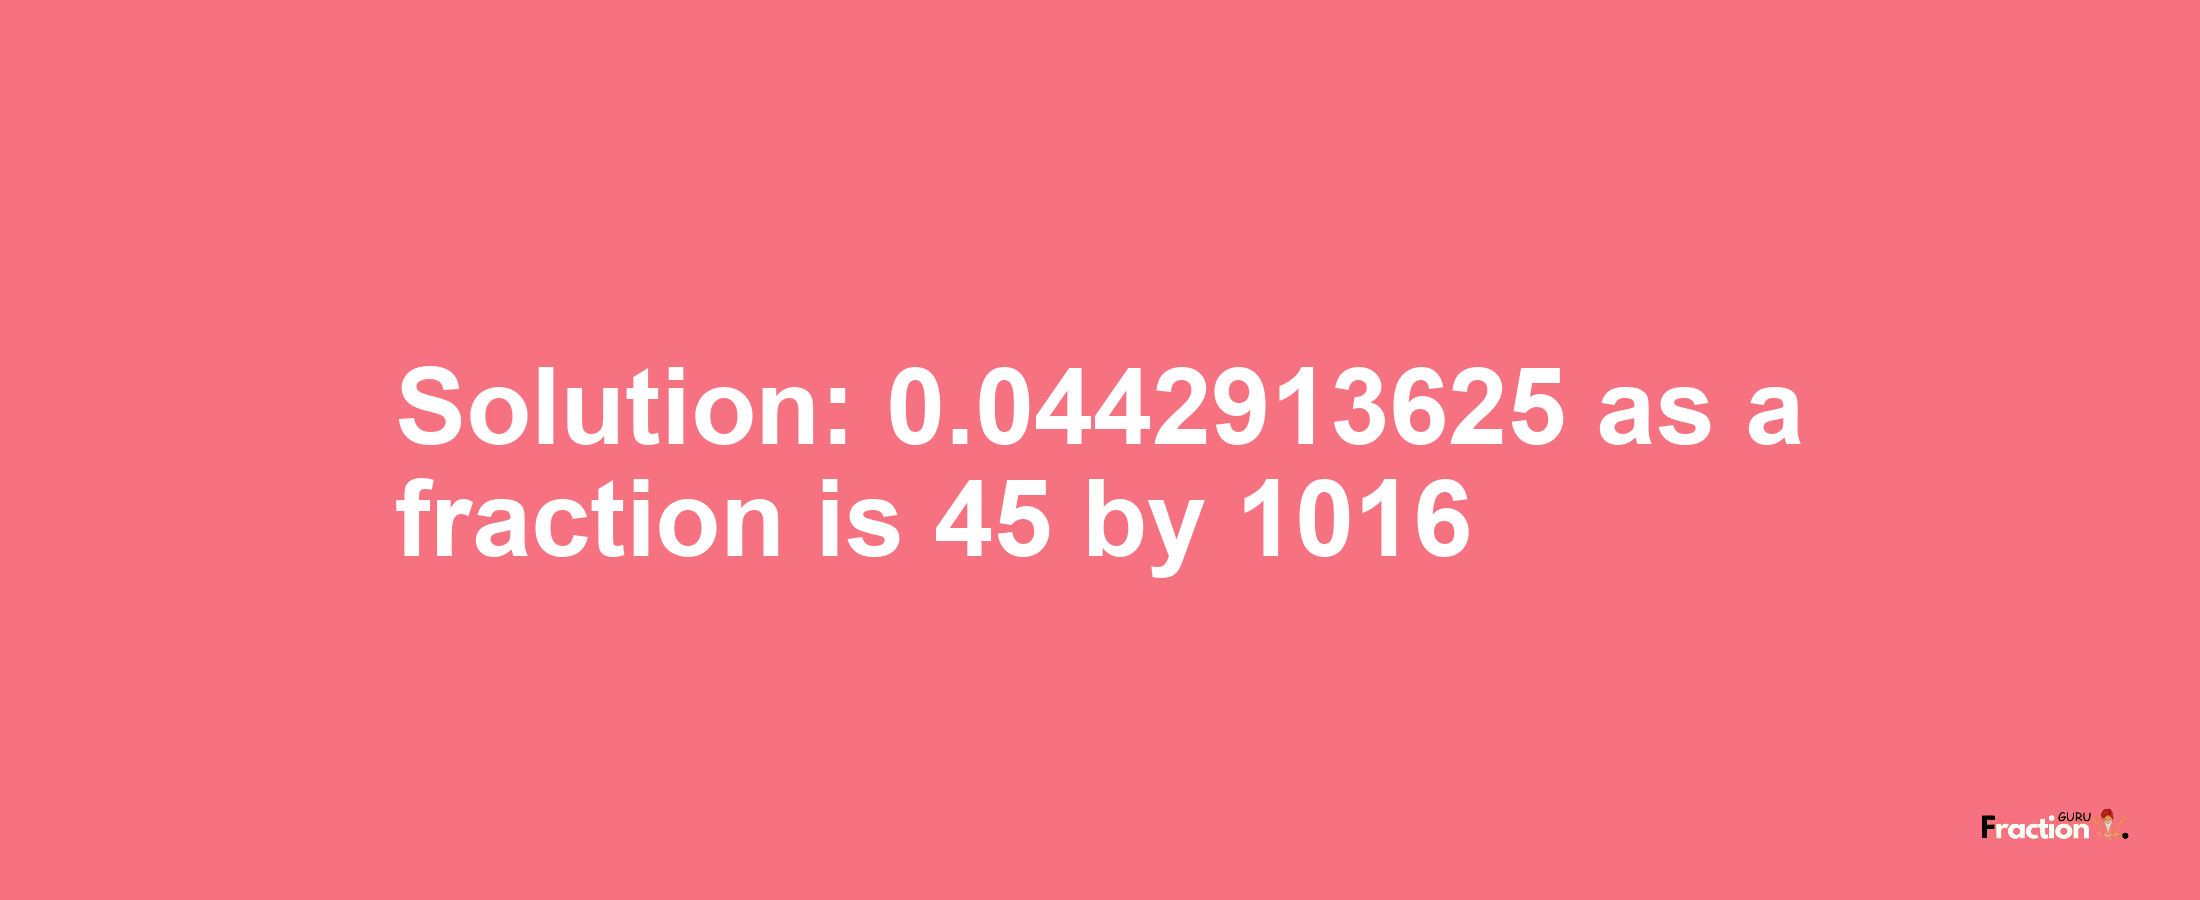 Solution:0.0442913625 as a fraction is 45/1016